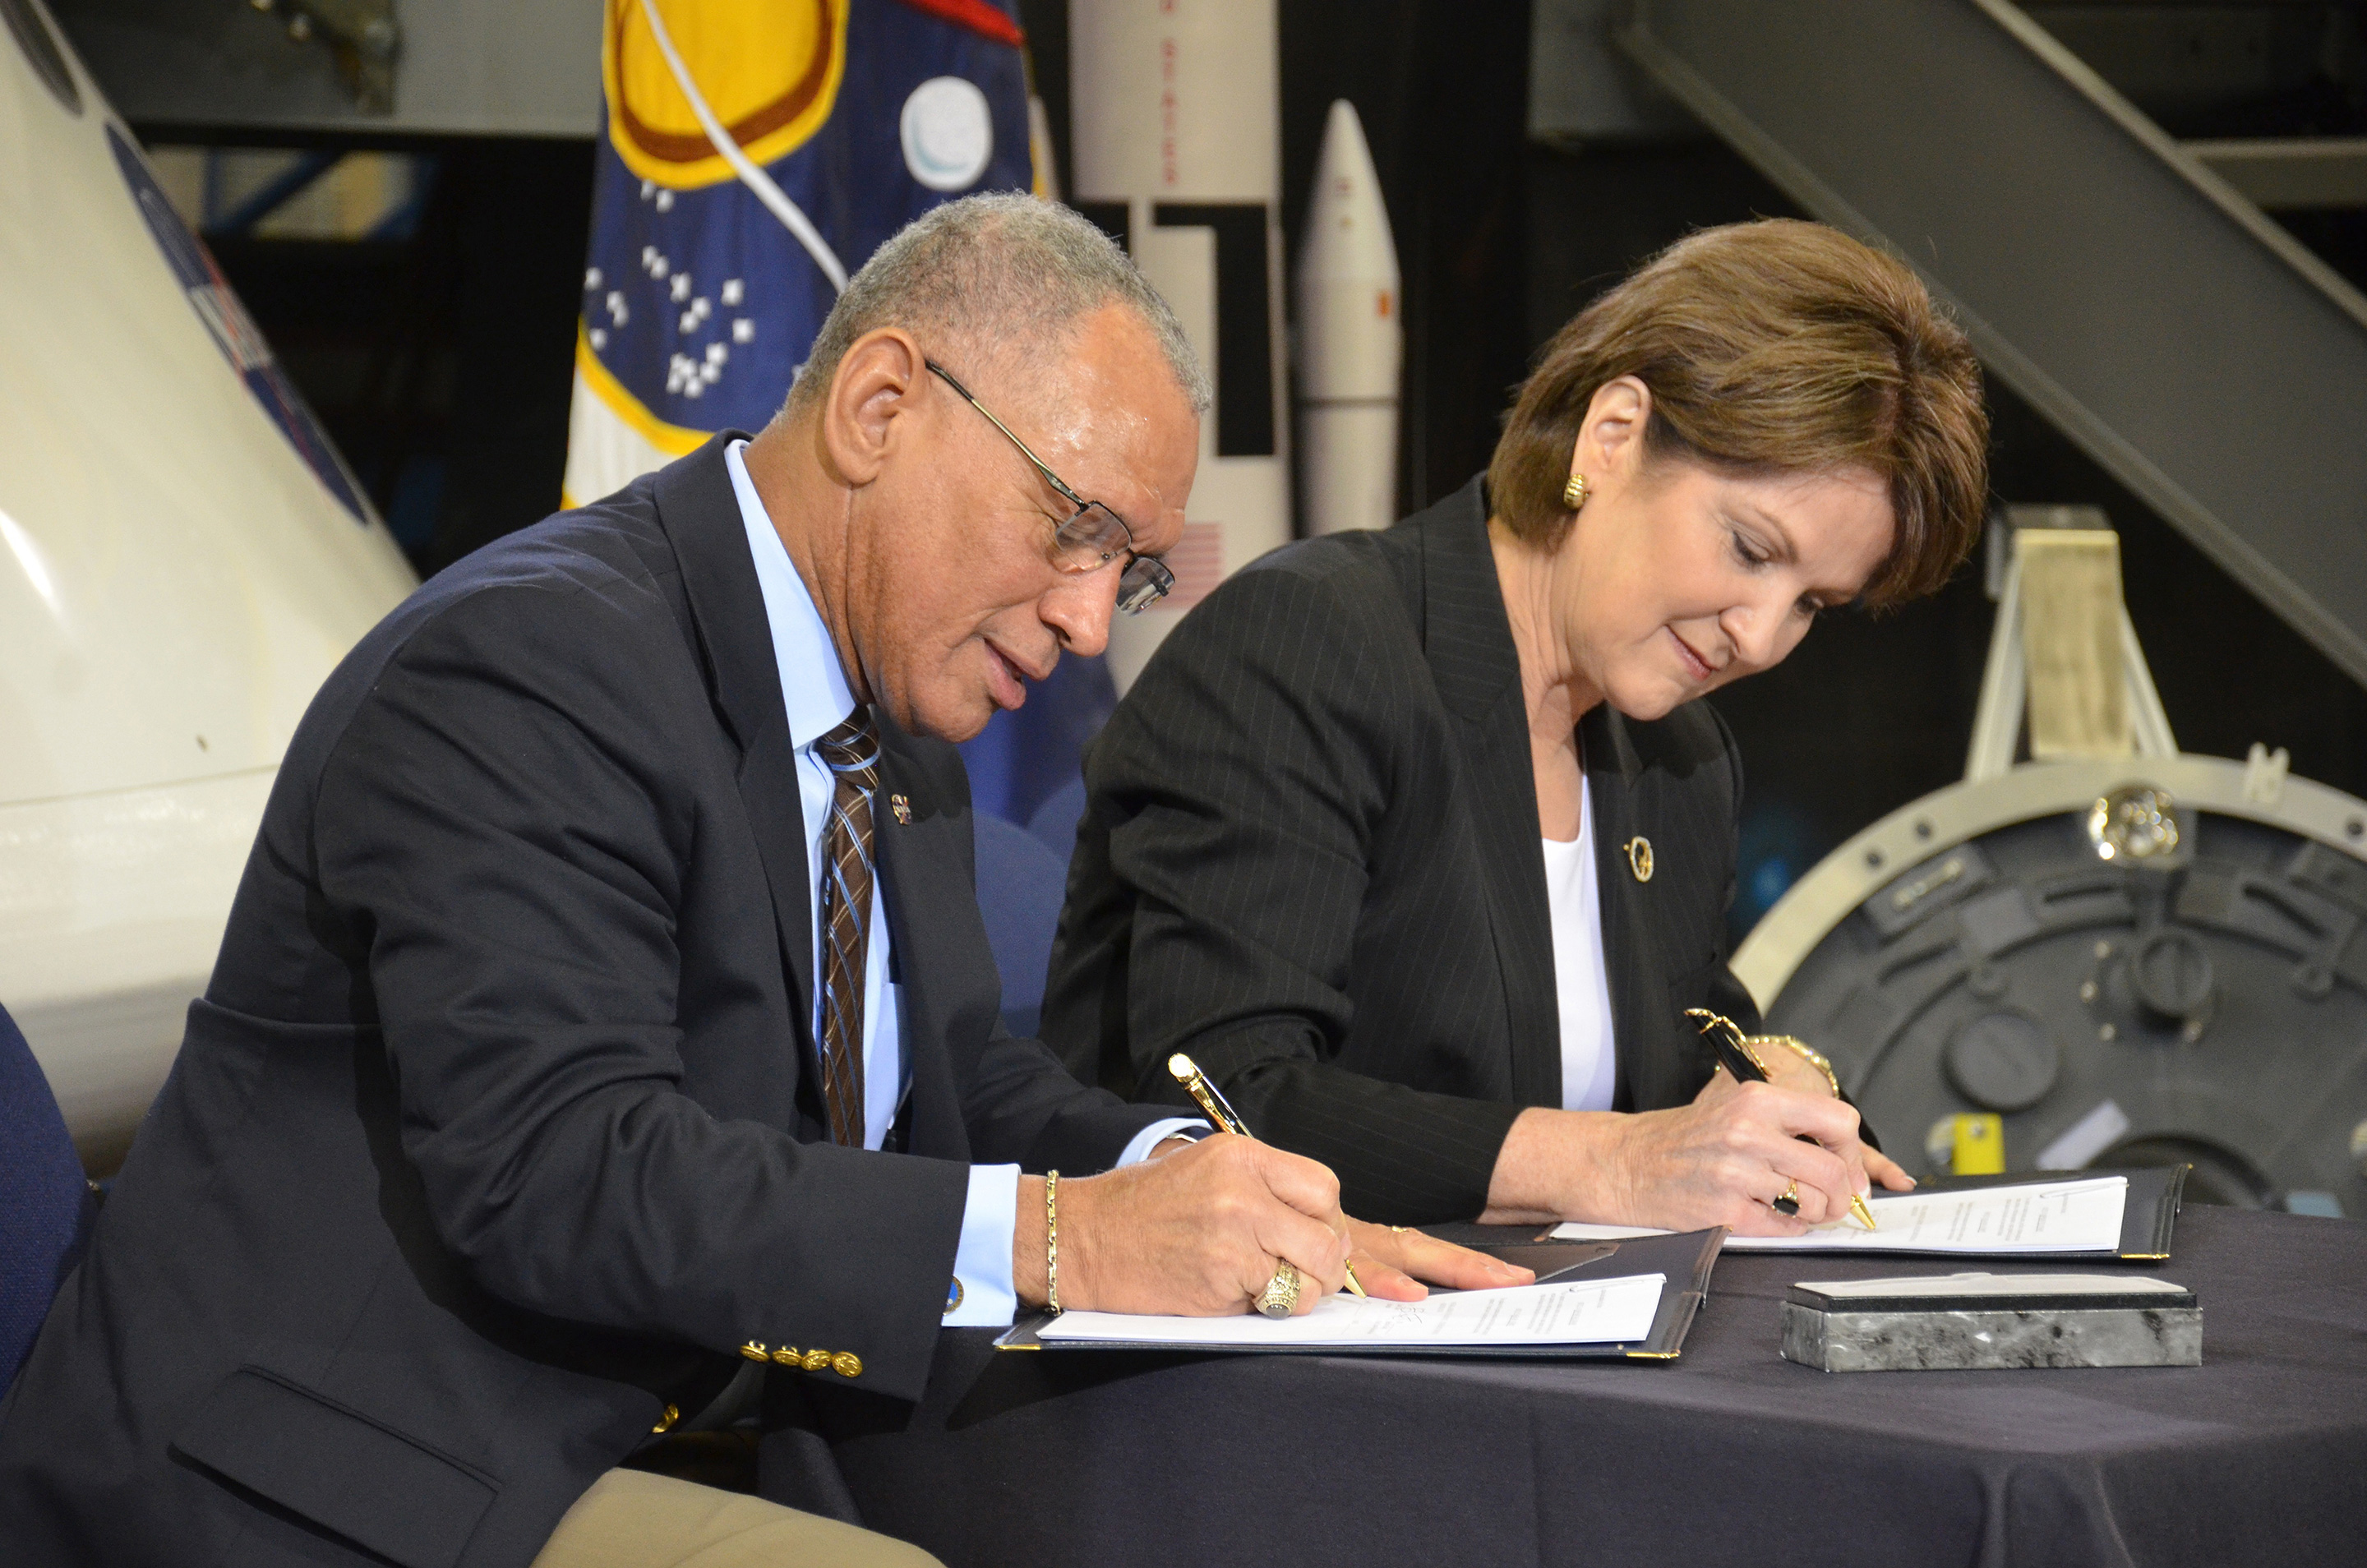 NASA Administrator Charles Bolden and Lockheed Martin CEO Marillyn Hewson sign an agreement enabling NASA’s Exploration Design Challenge for students. Photo: Robert Pearlman/collectSPACE.com